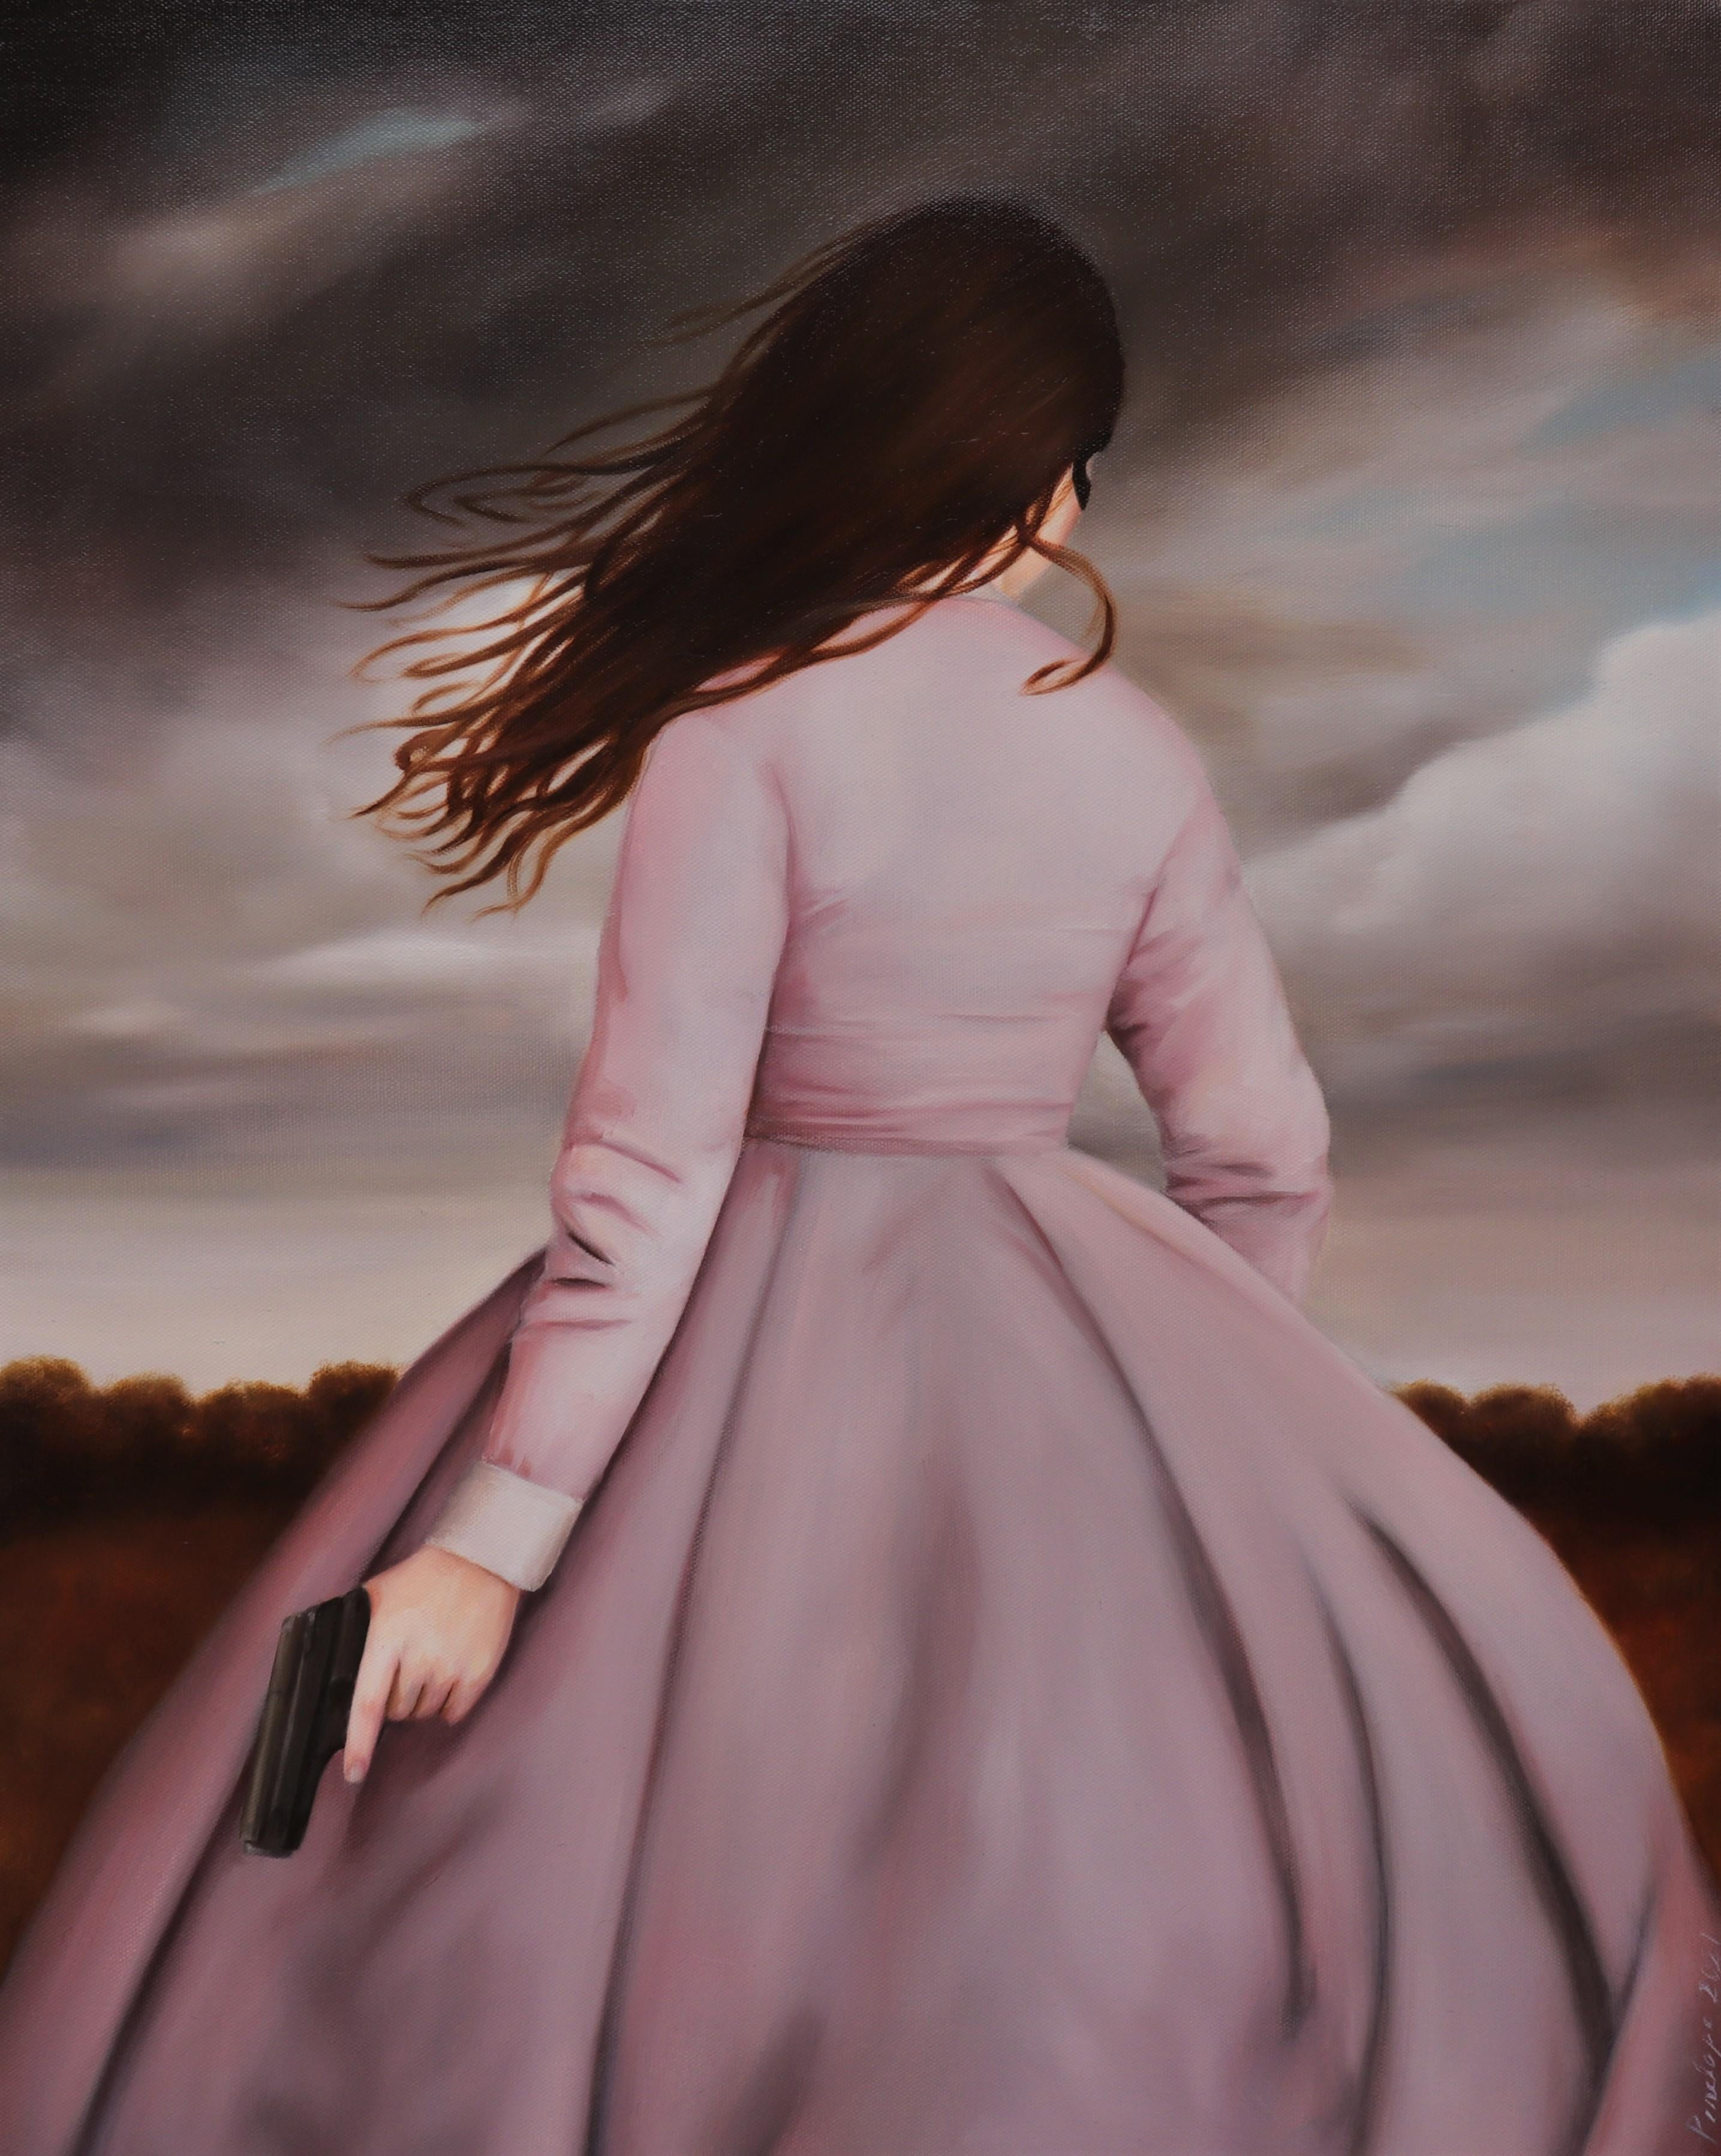 Penelope Boyd Portrait Painting - Morality is Intrinsically Rewarding -  Girl in a Old World Pink Dress & Gun